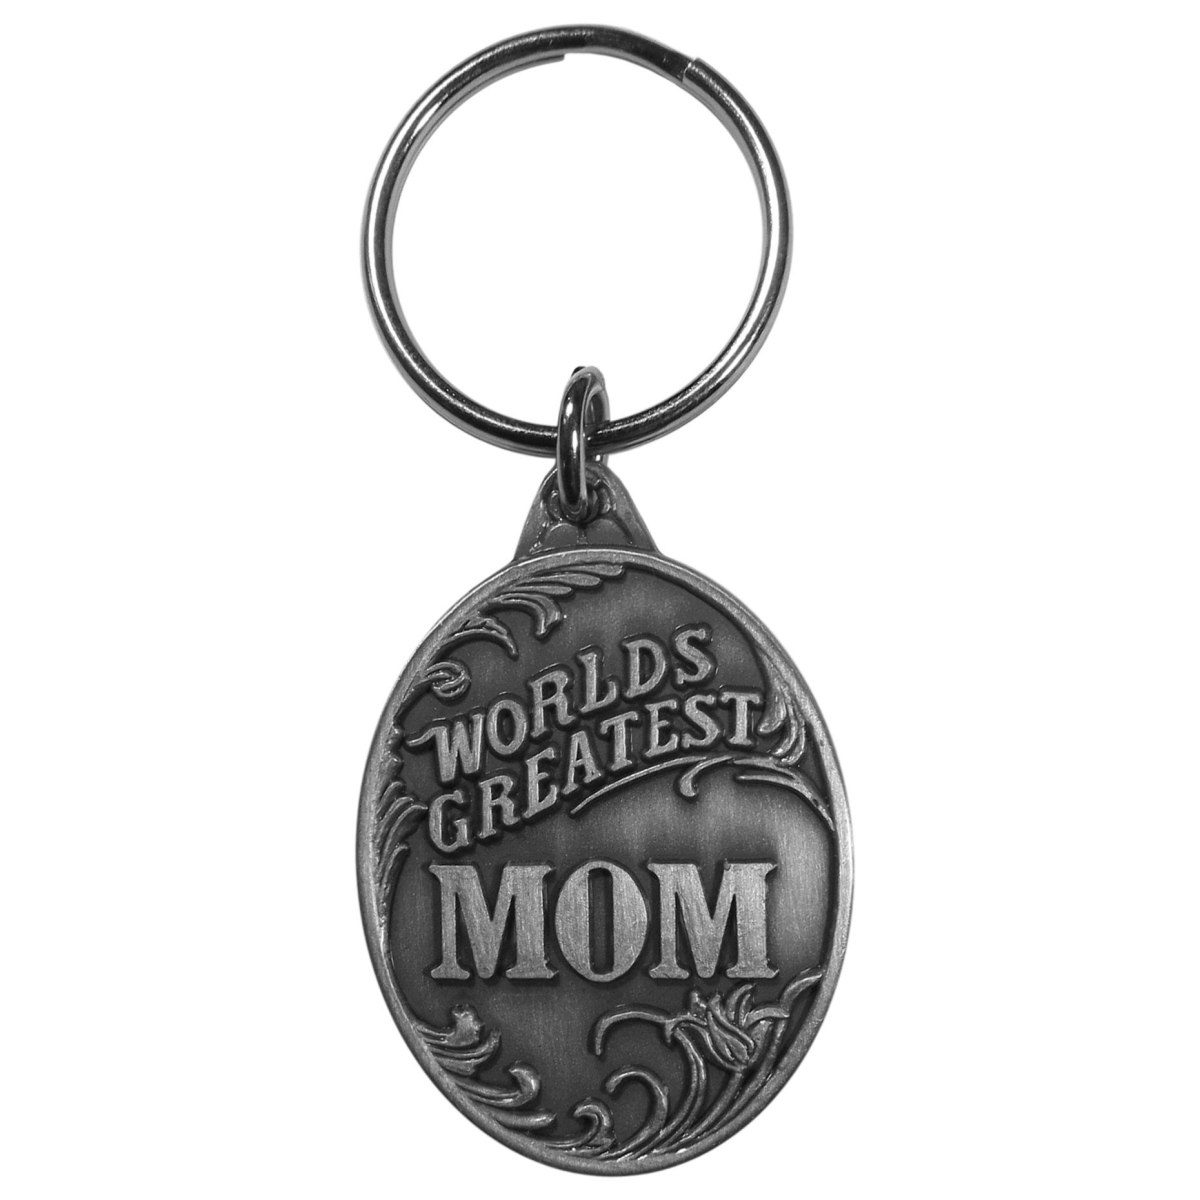 Picture of Siskiyou KR196 Worlds Greatest Mom Antiqued Metal Key Chain - One Size